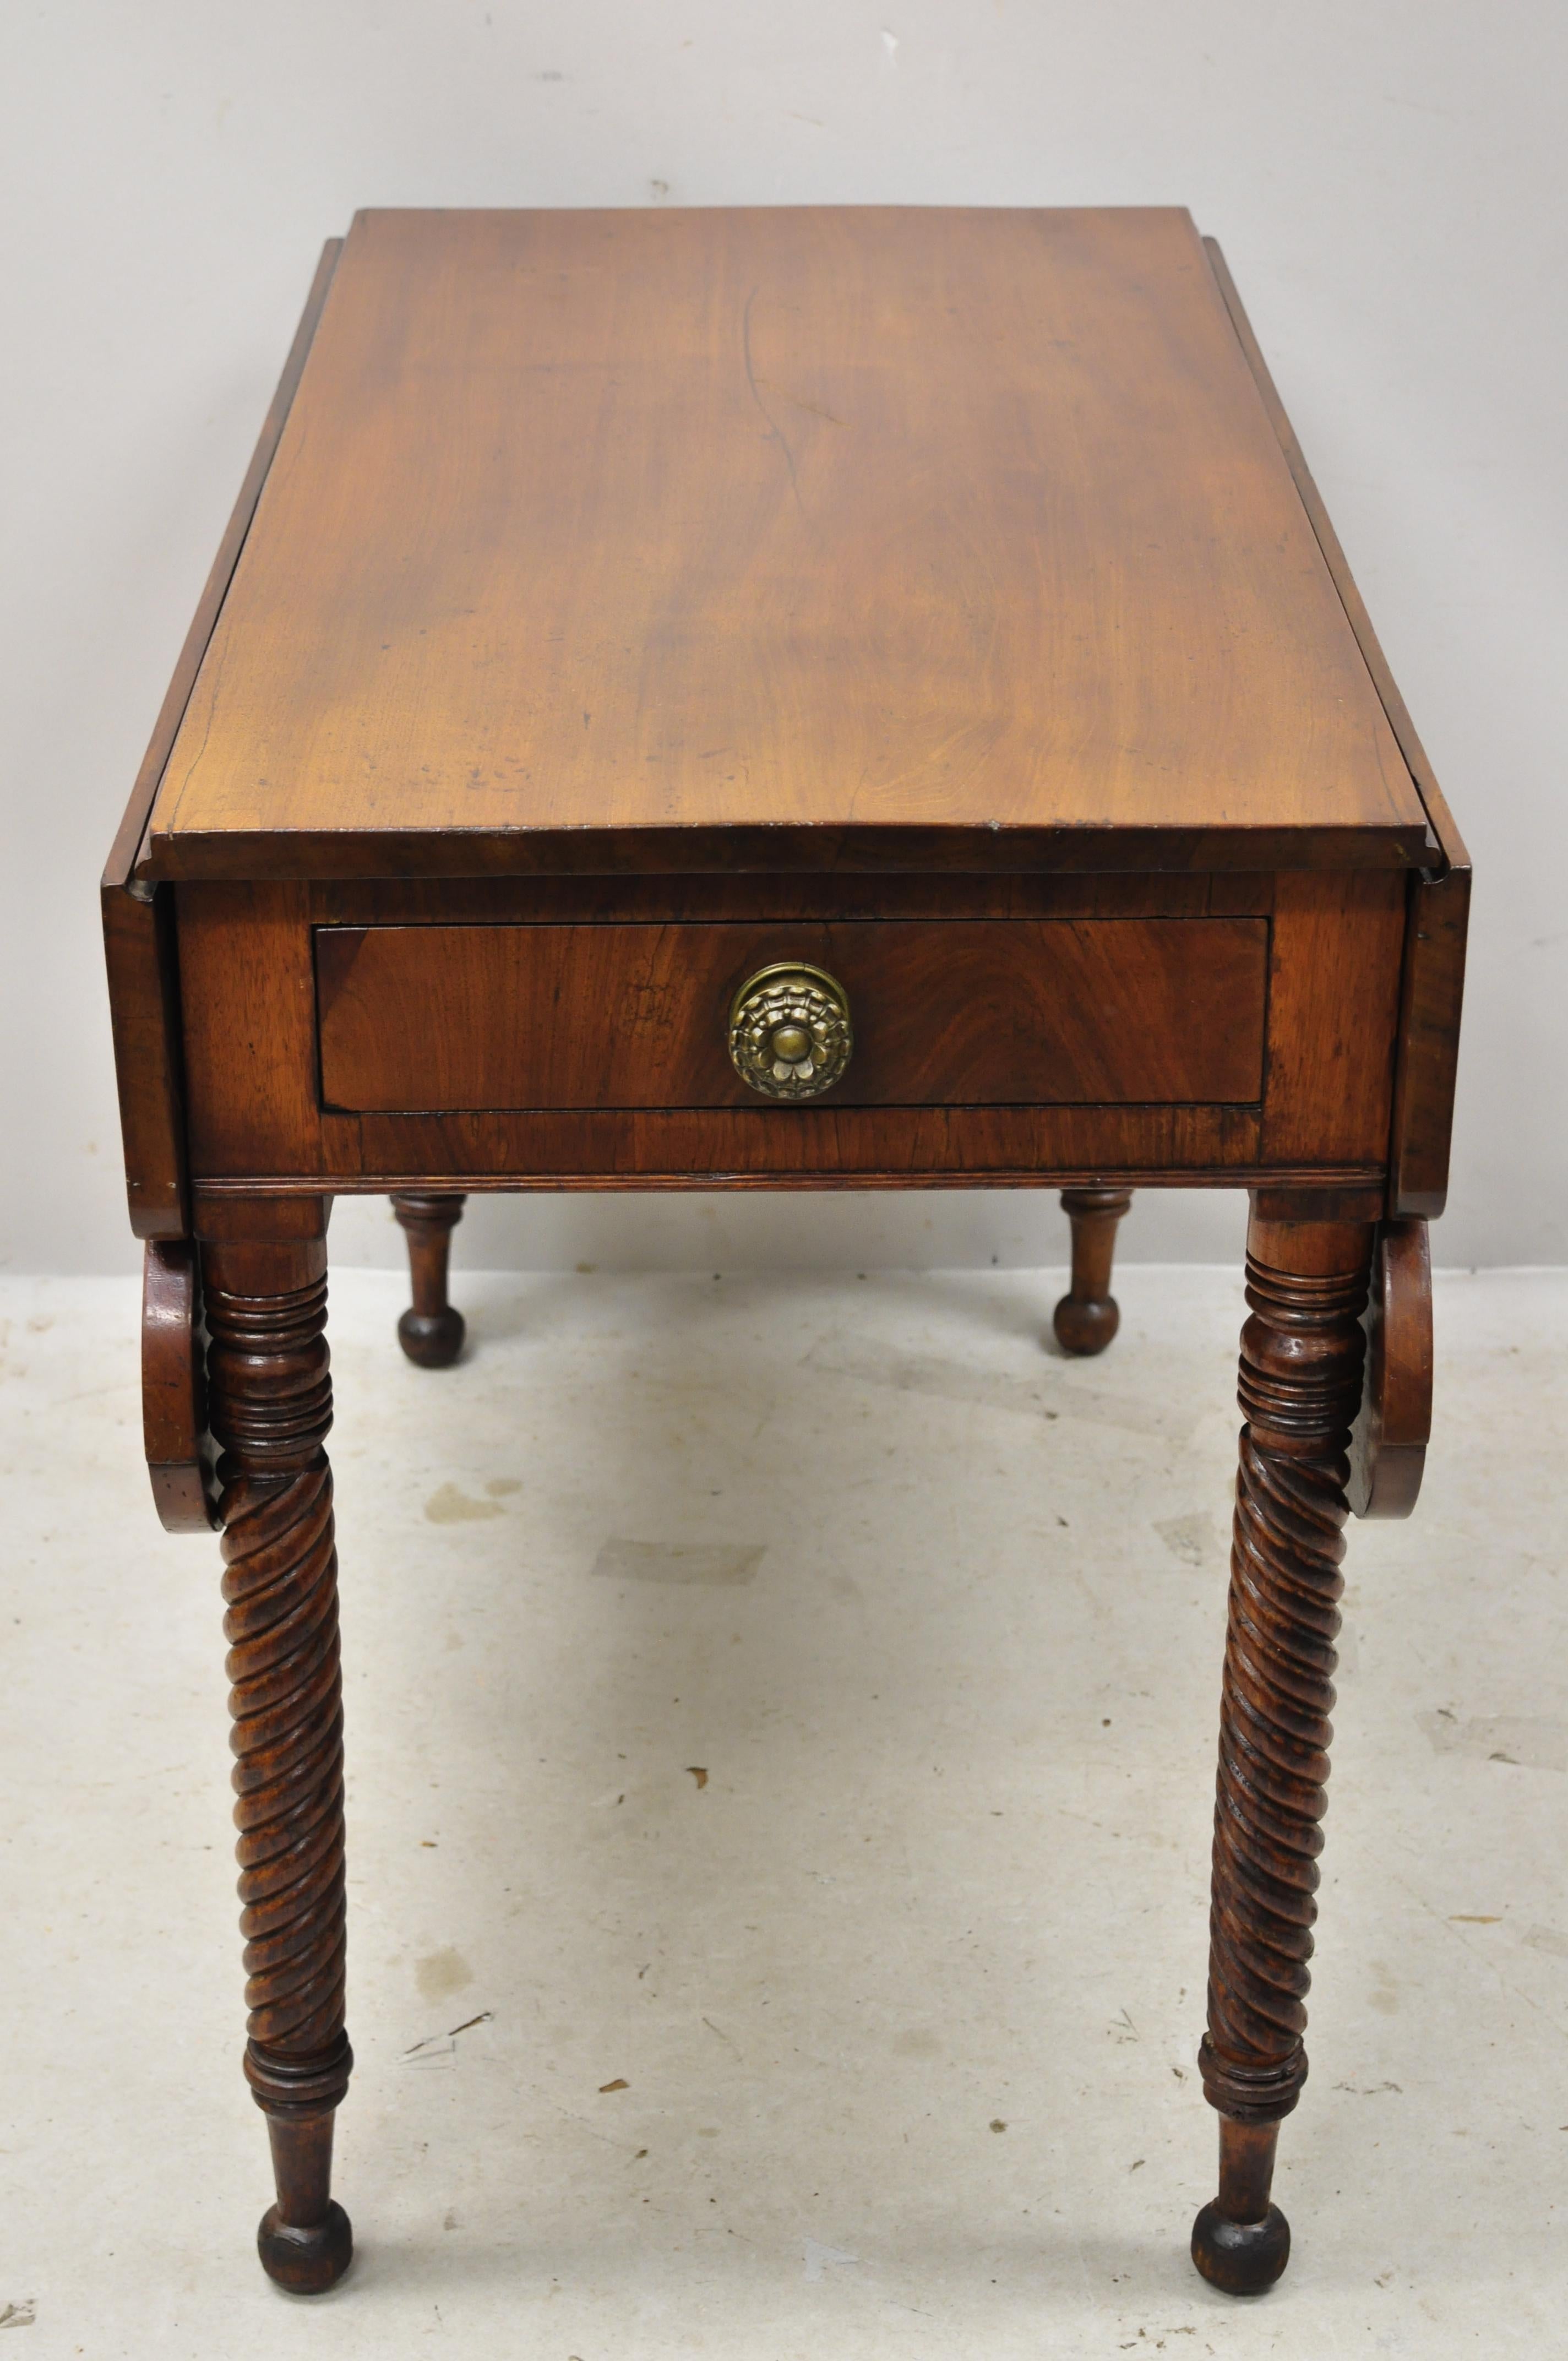 19th Century Scallop Carved Drop Leaf Mahogany Breakfast Dining Table 1-Drawer 3